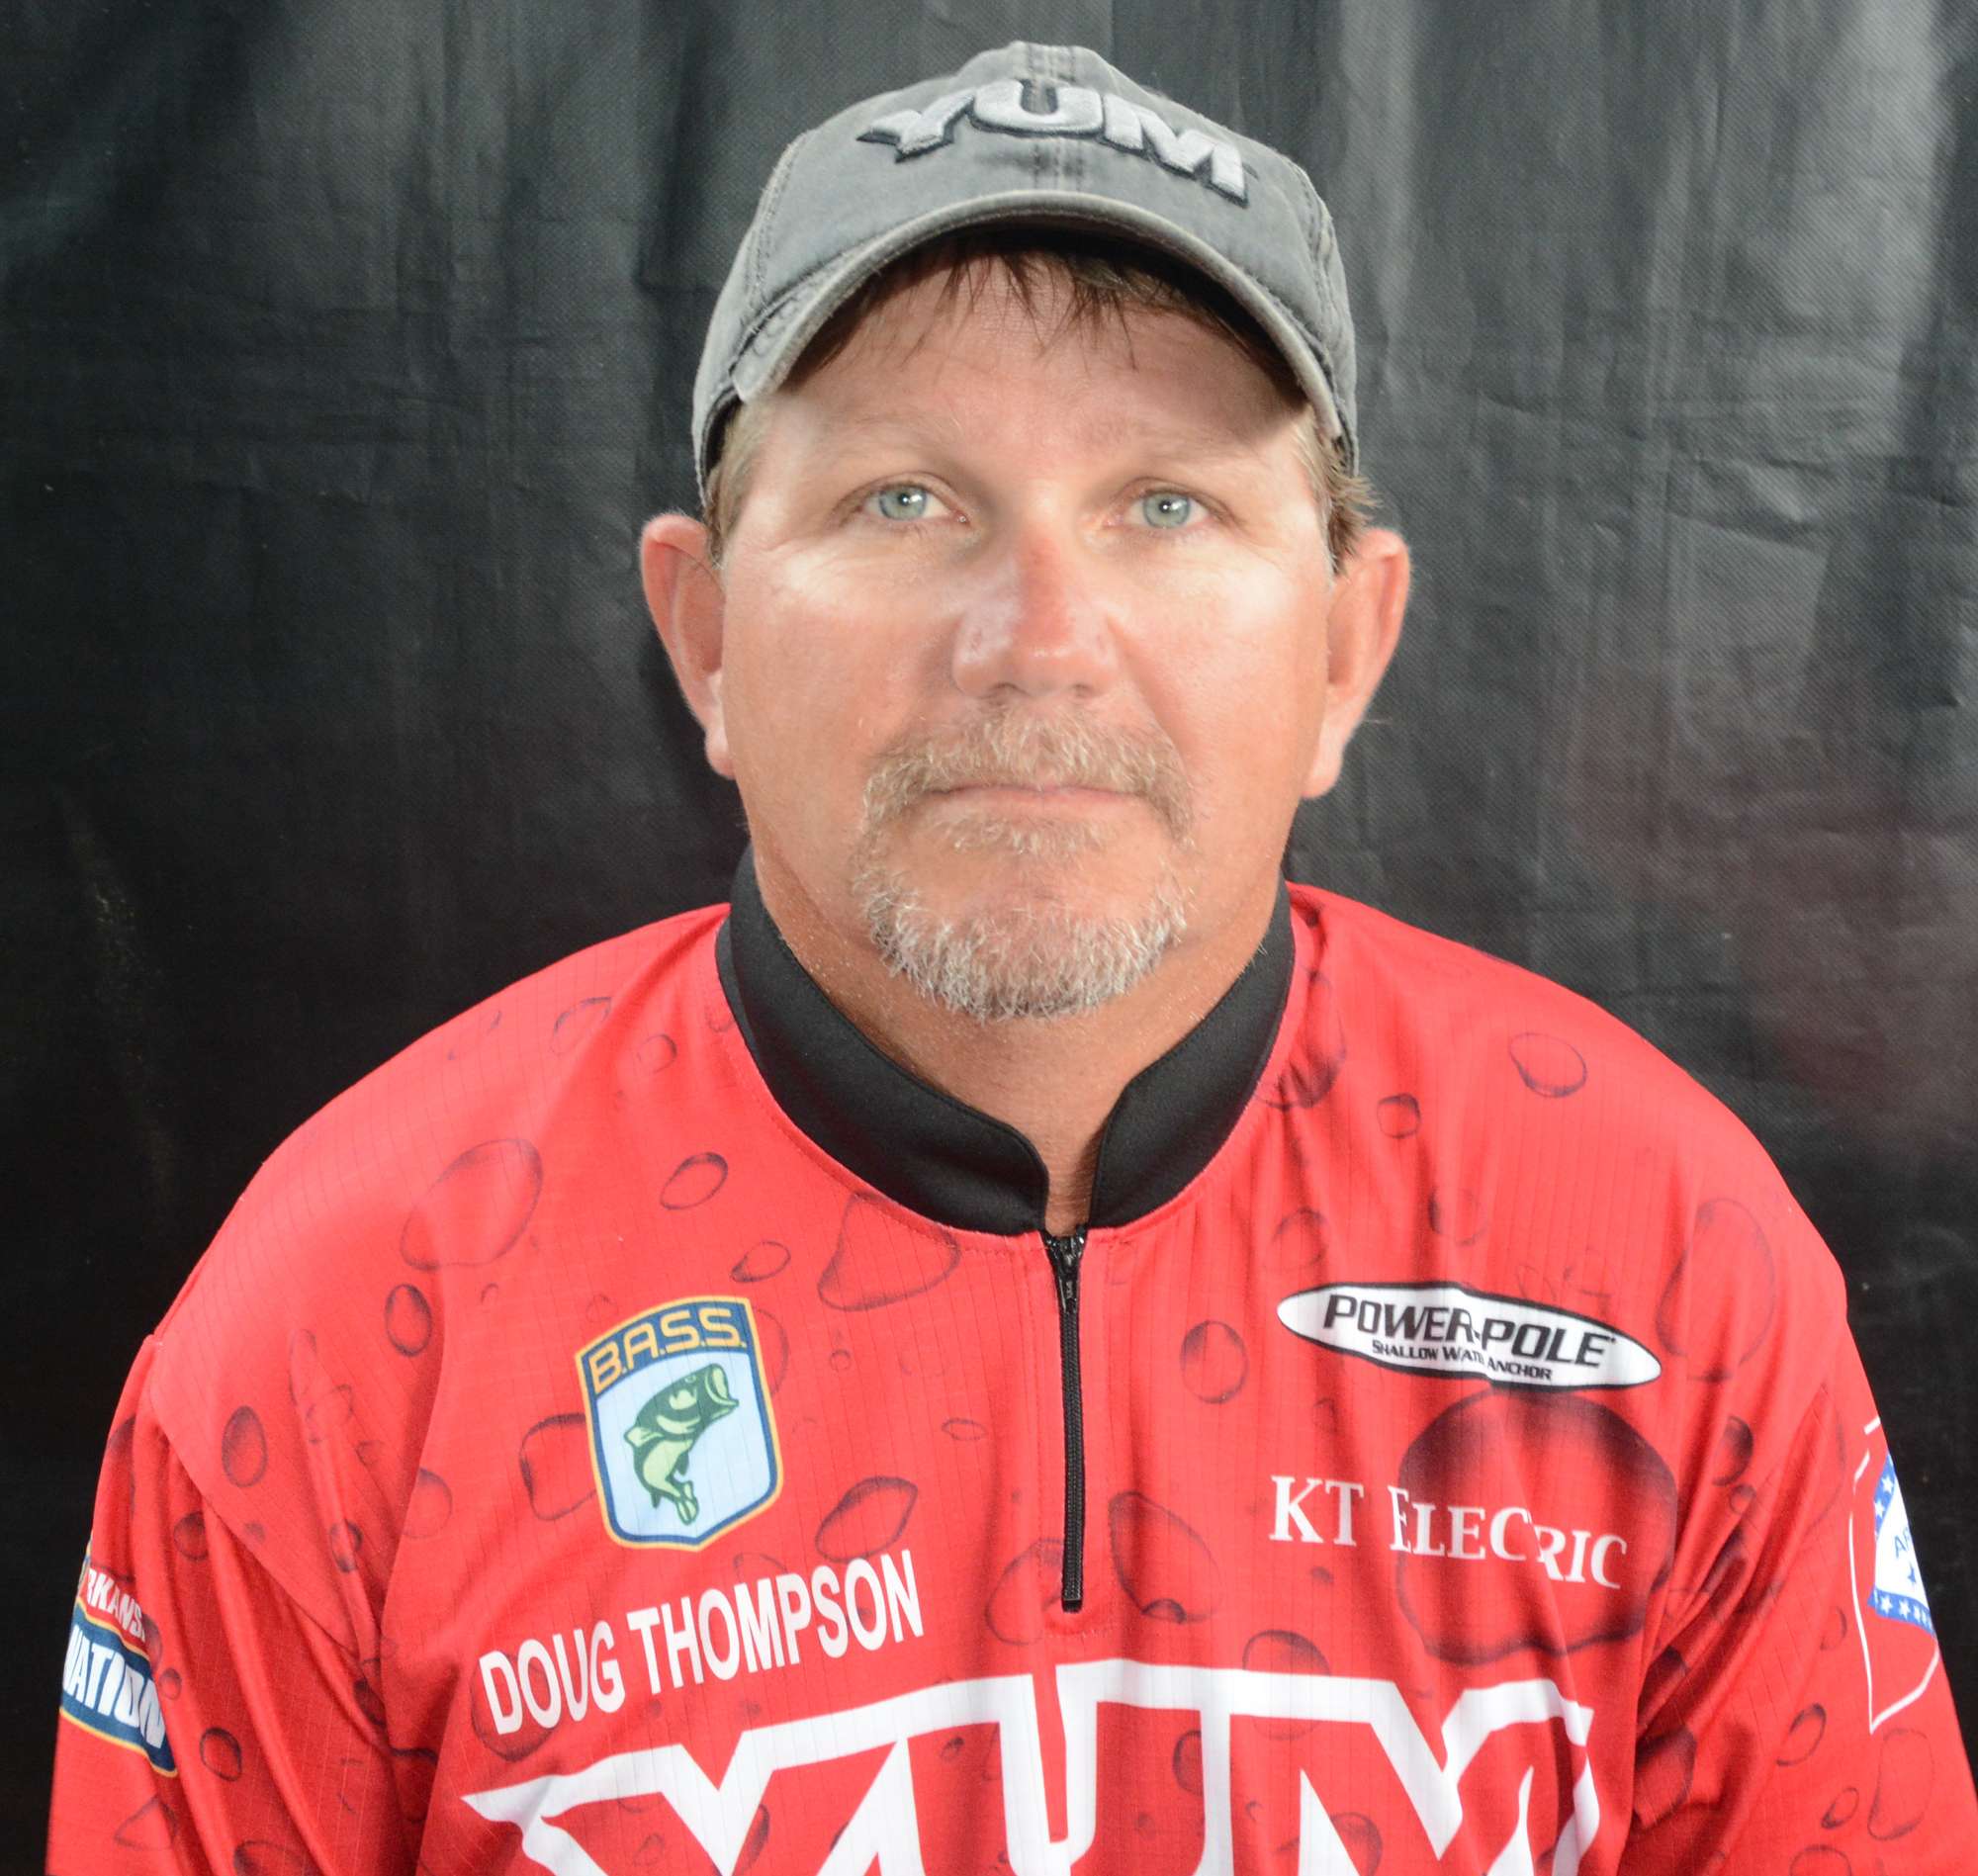 Doug Thompson of Arkansas has already had one trip to the Bassmaster Classic; now he's ready for another. He's a hardware engineer, which has something to do with computers. Thompson is a member of the Natural State Bass Anglers, and in his spare time, he likes playing guitar and hunting.